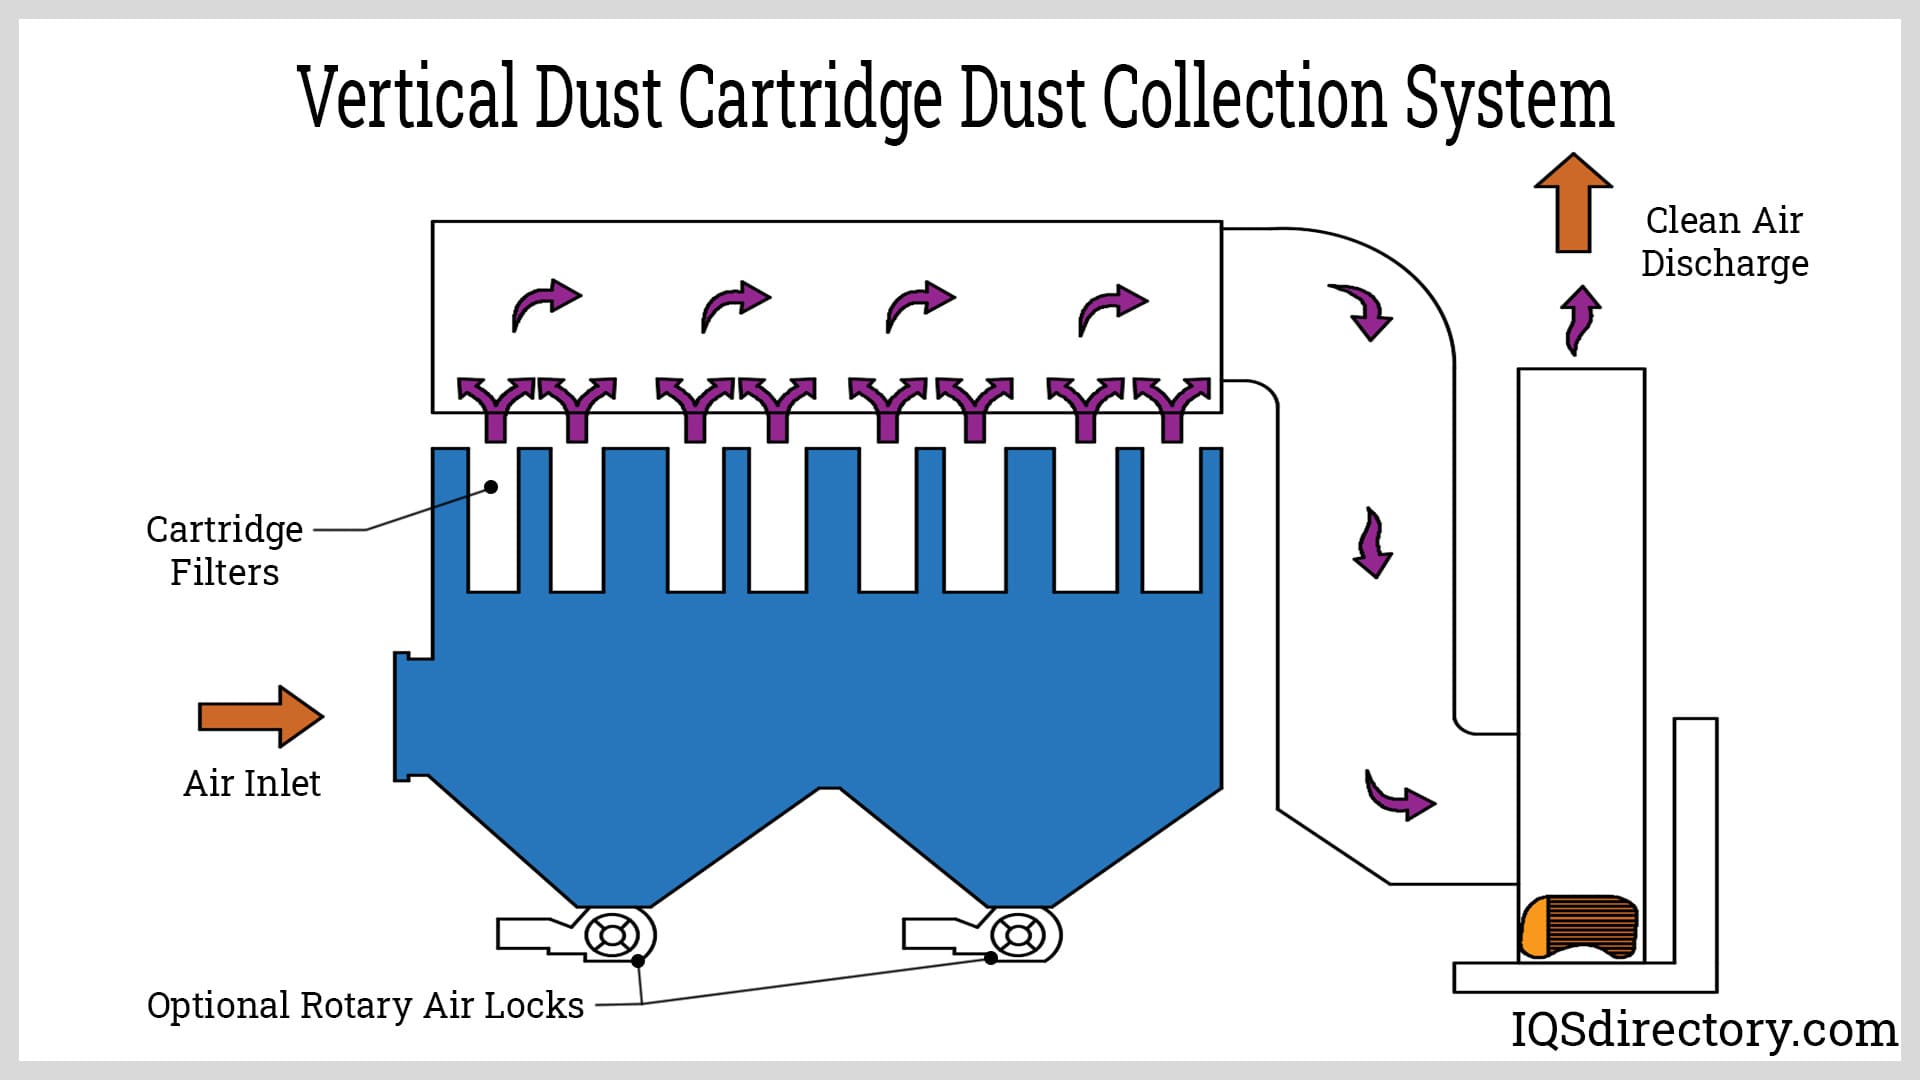 Vertical Dust Cartridge Dust Collection System